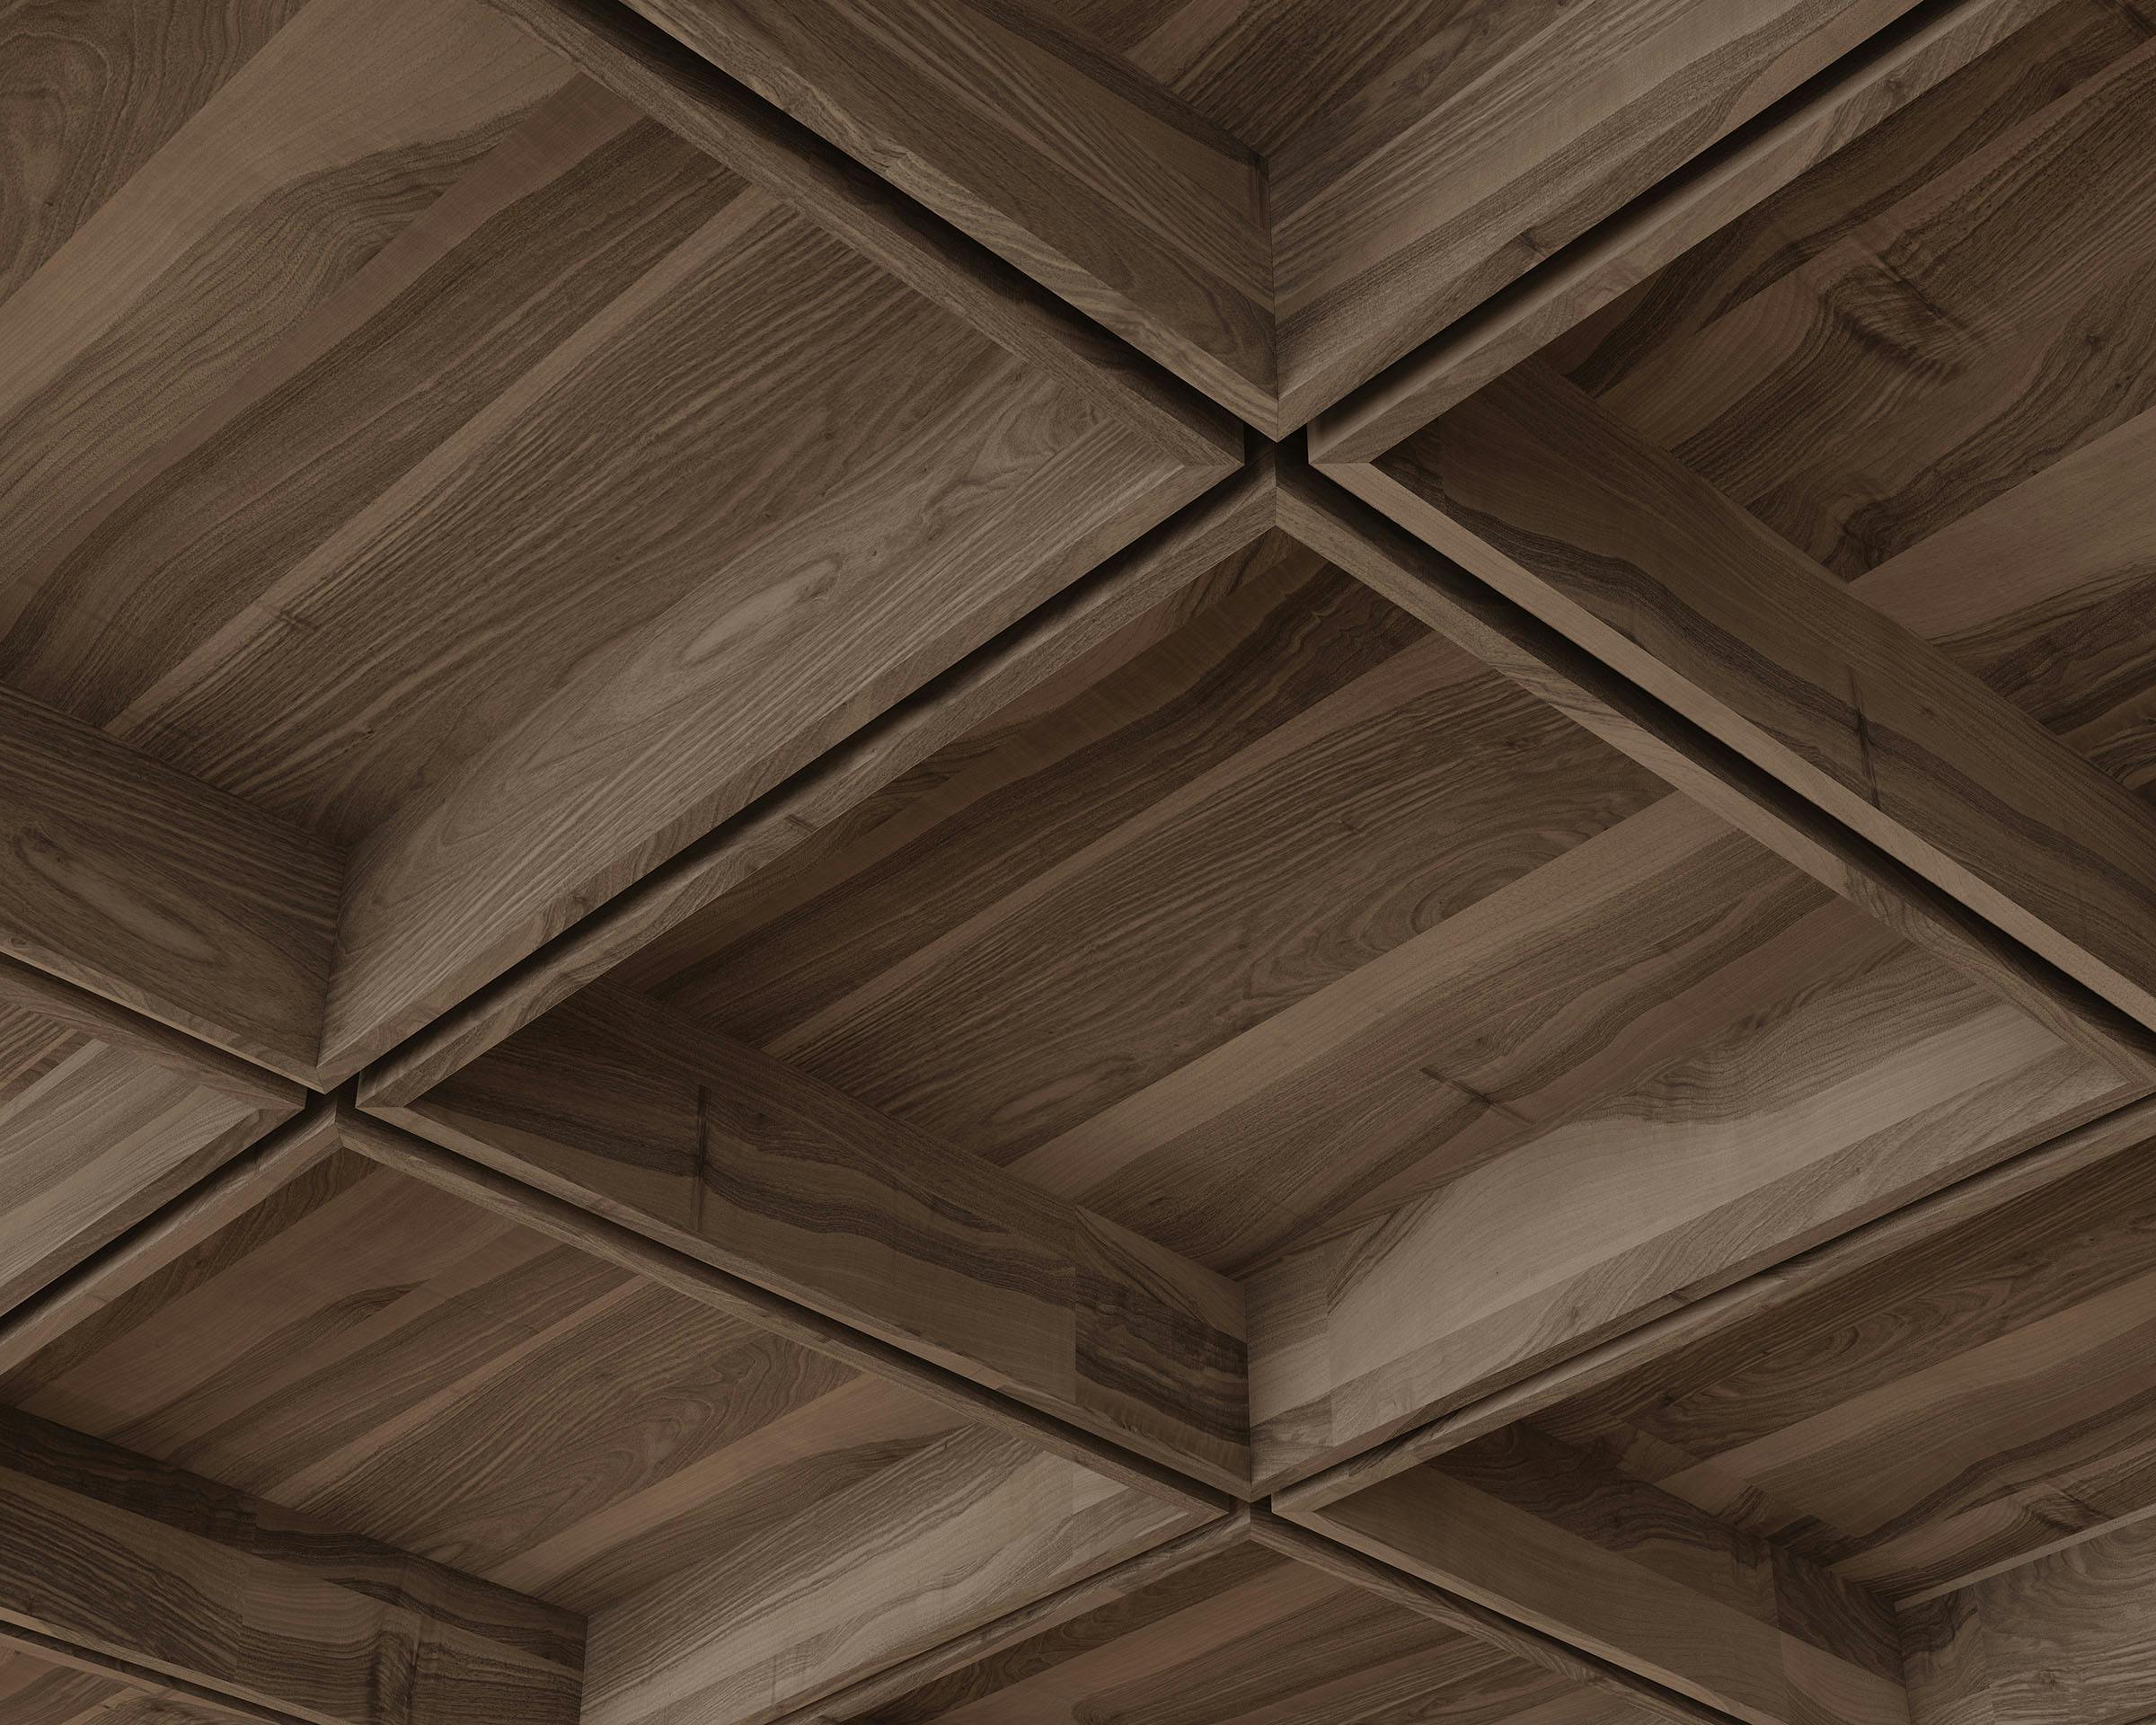 Close-up view of a wooden waffle pattern on a ceiling, showcasing the natural grain and rich color variations in the wood, reminiscent of a finely crafted acoustic guitar.